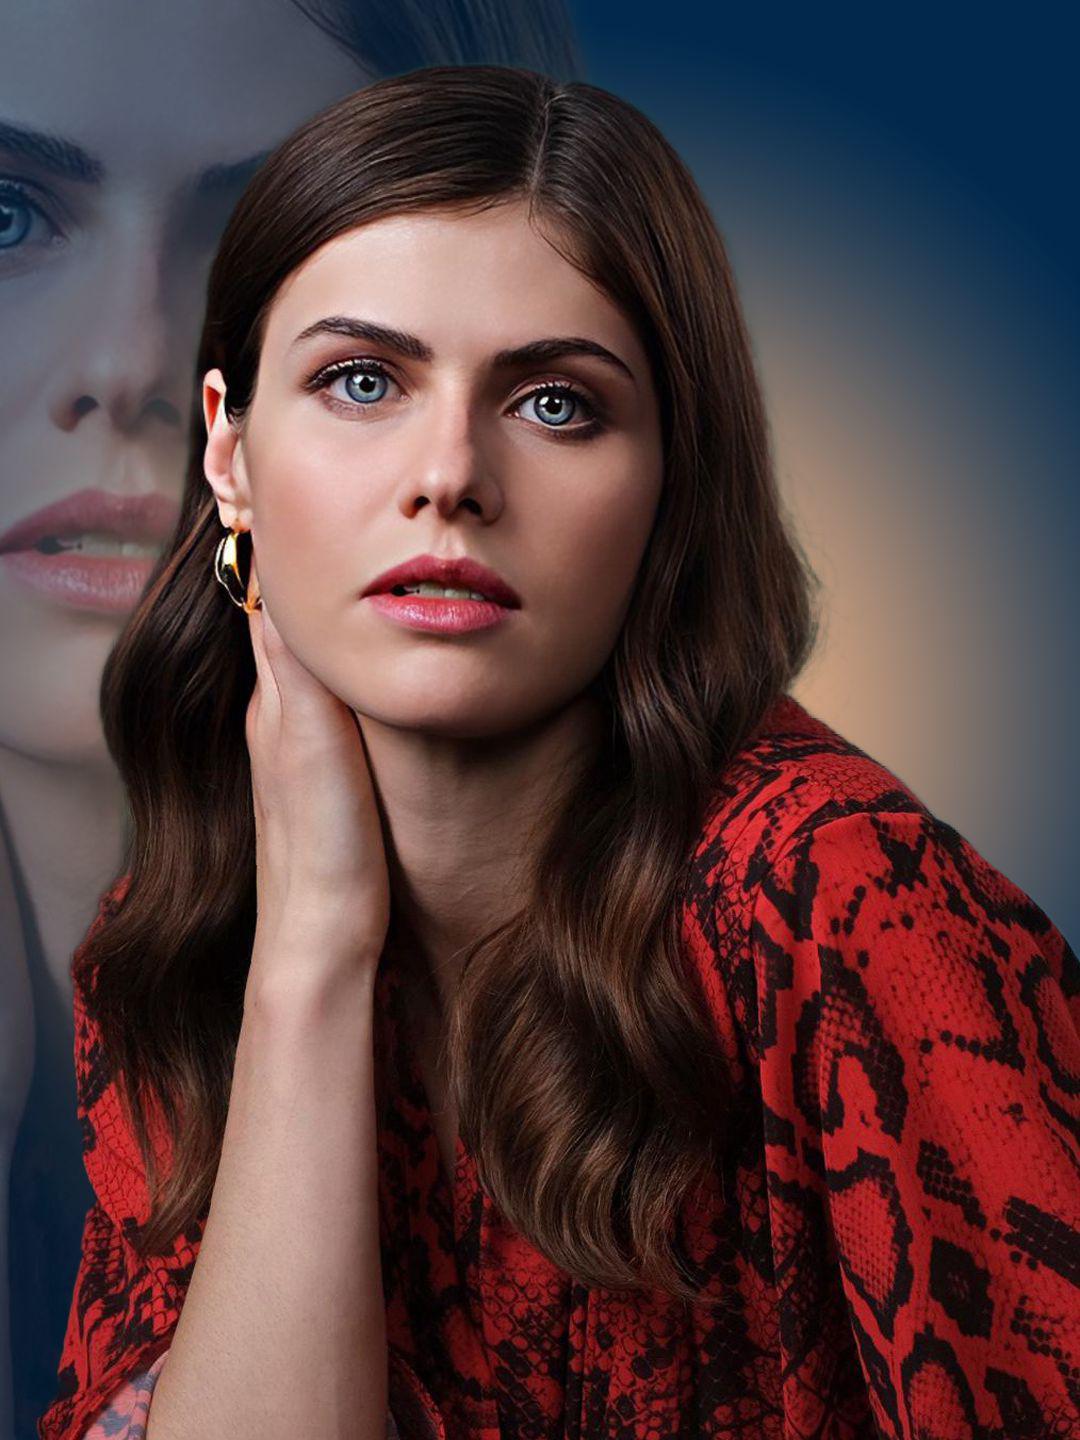 Socialist Dad arrival Alexandra Anna Daddario - Celeb ART - Beautiful Artworks of Celebrities,  Footballers, Politicians and Famous People in World | OpenSea